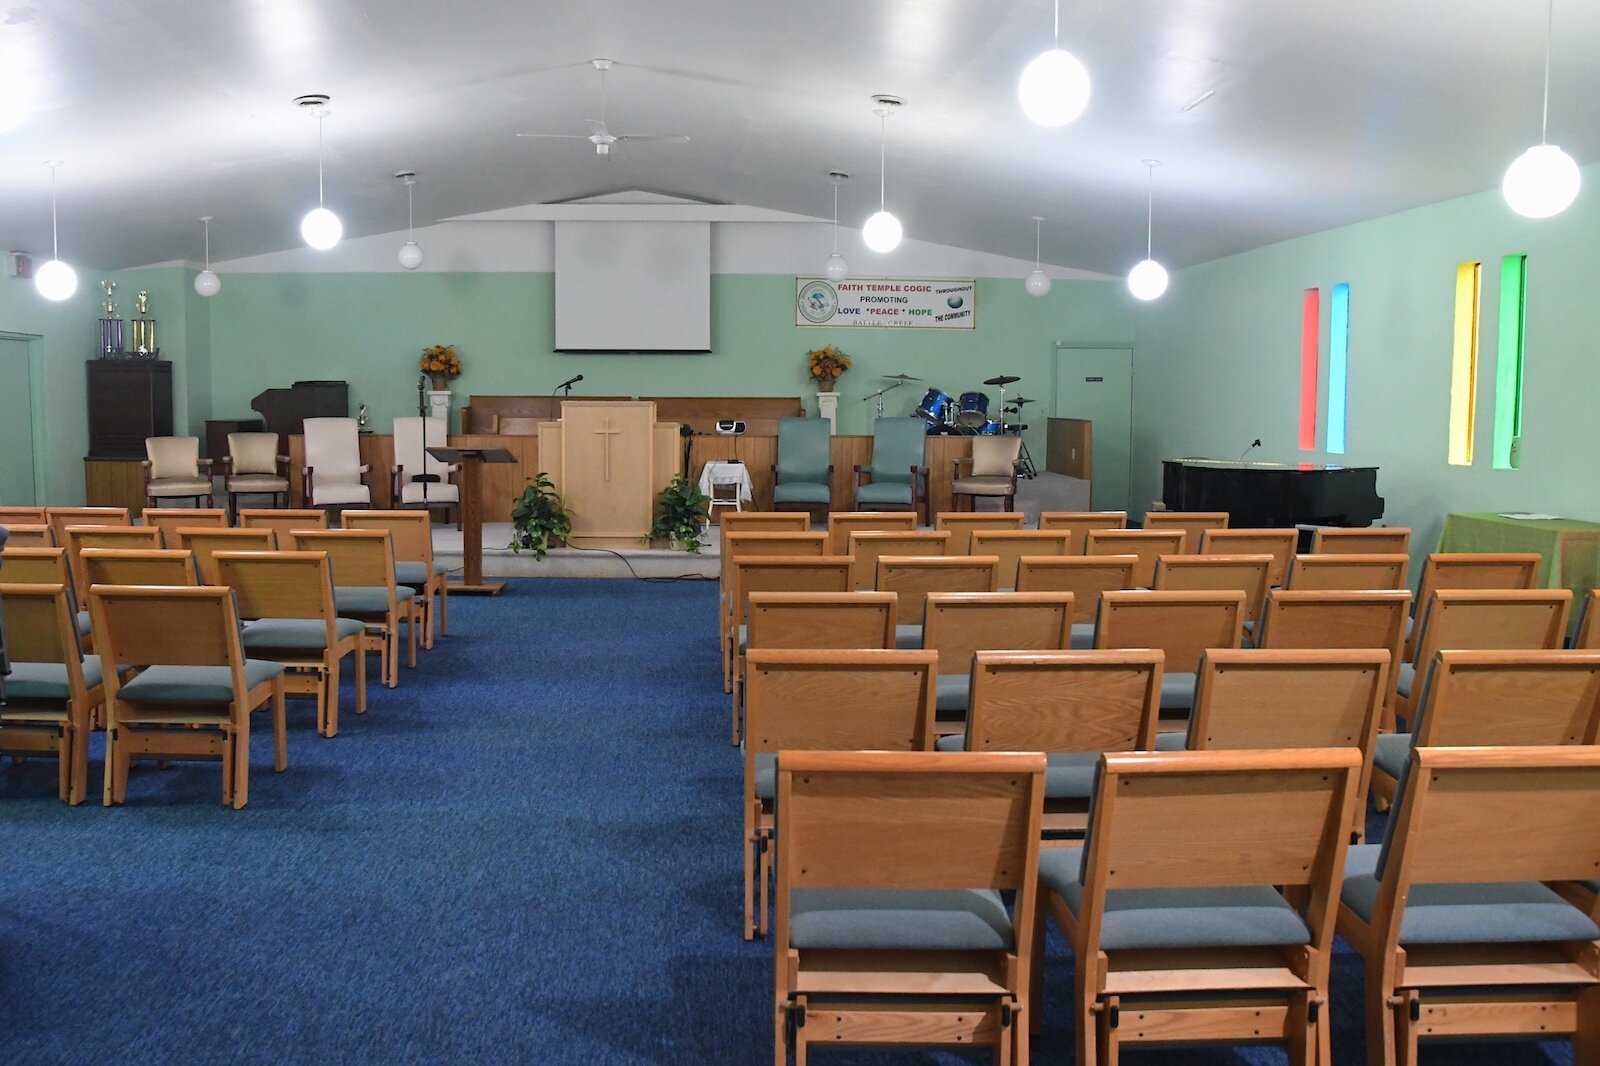 A view inside the sanctuary of the Faith Temple Church of God in Christ.